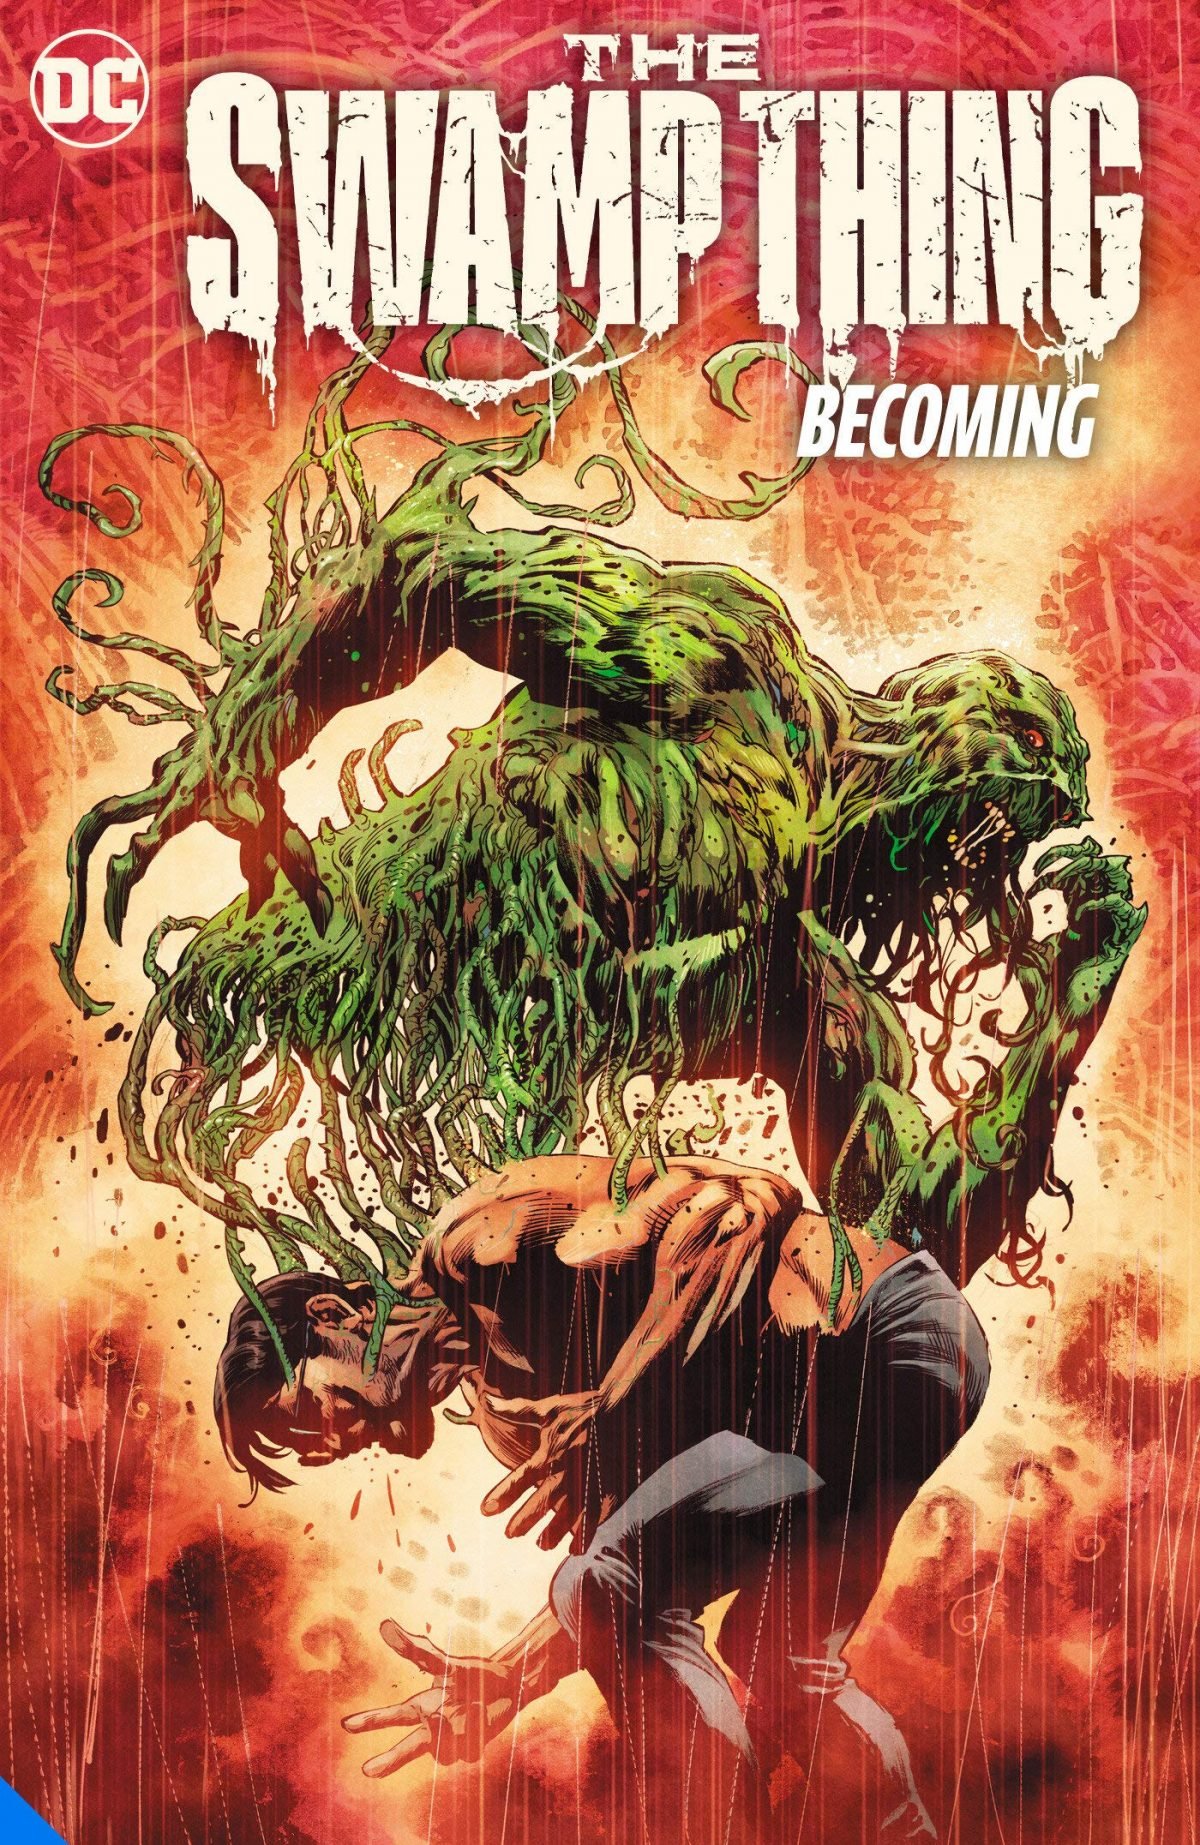 Cover of The Swamp Thing comic book referred to in American Born Chinese